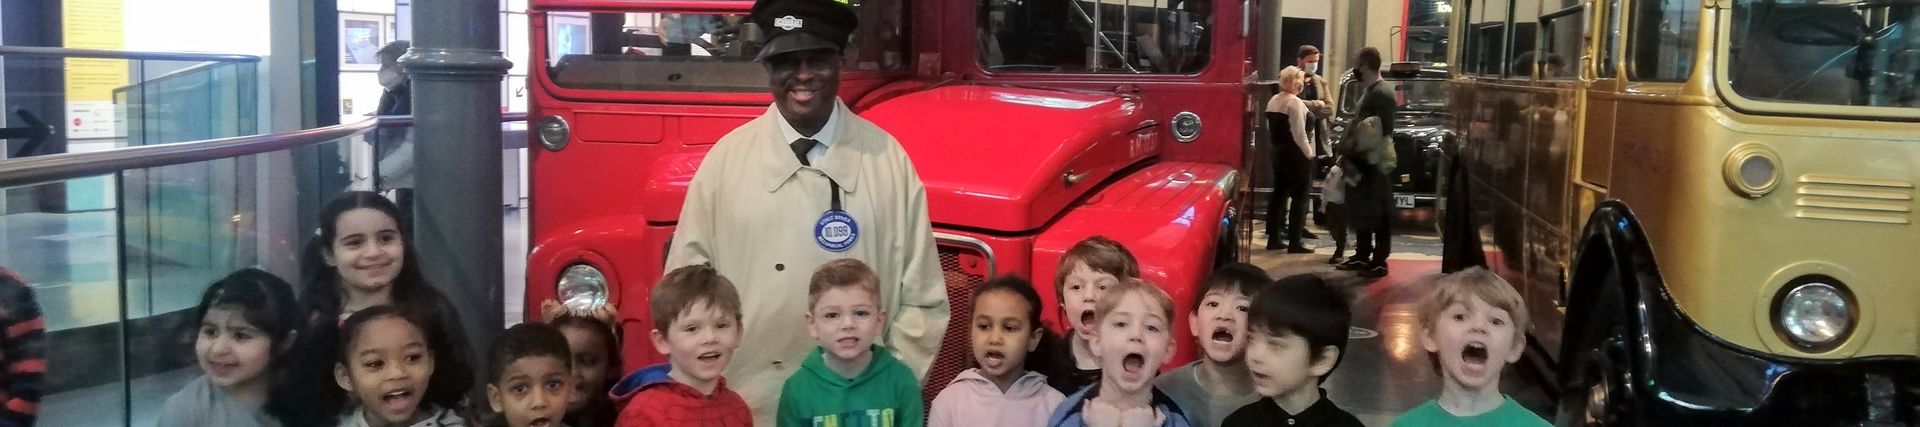 A man dressed as a bus conductor and a group of school children pose in front of a bus in the museum